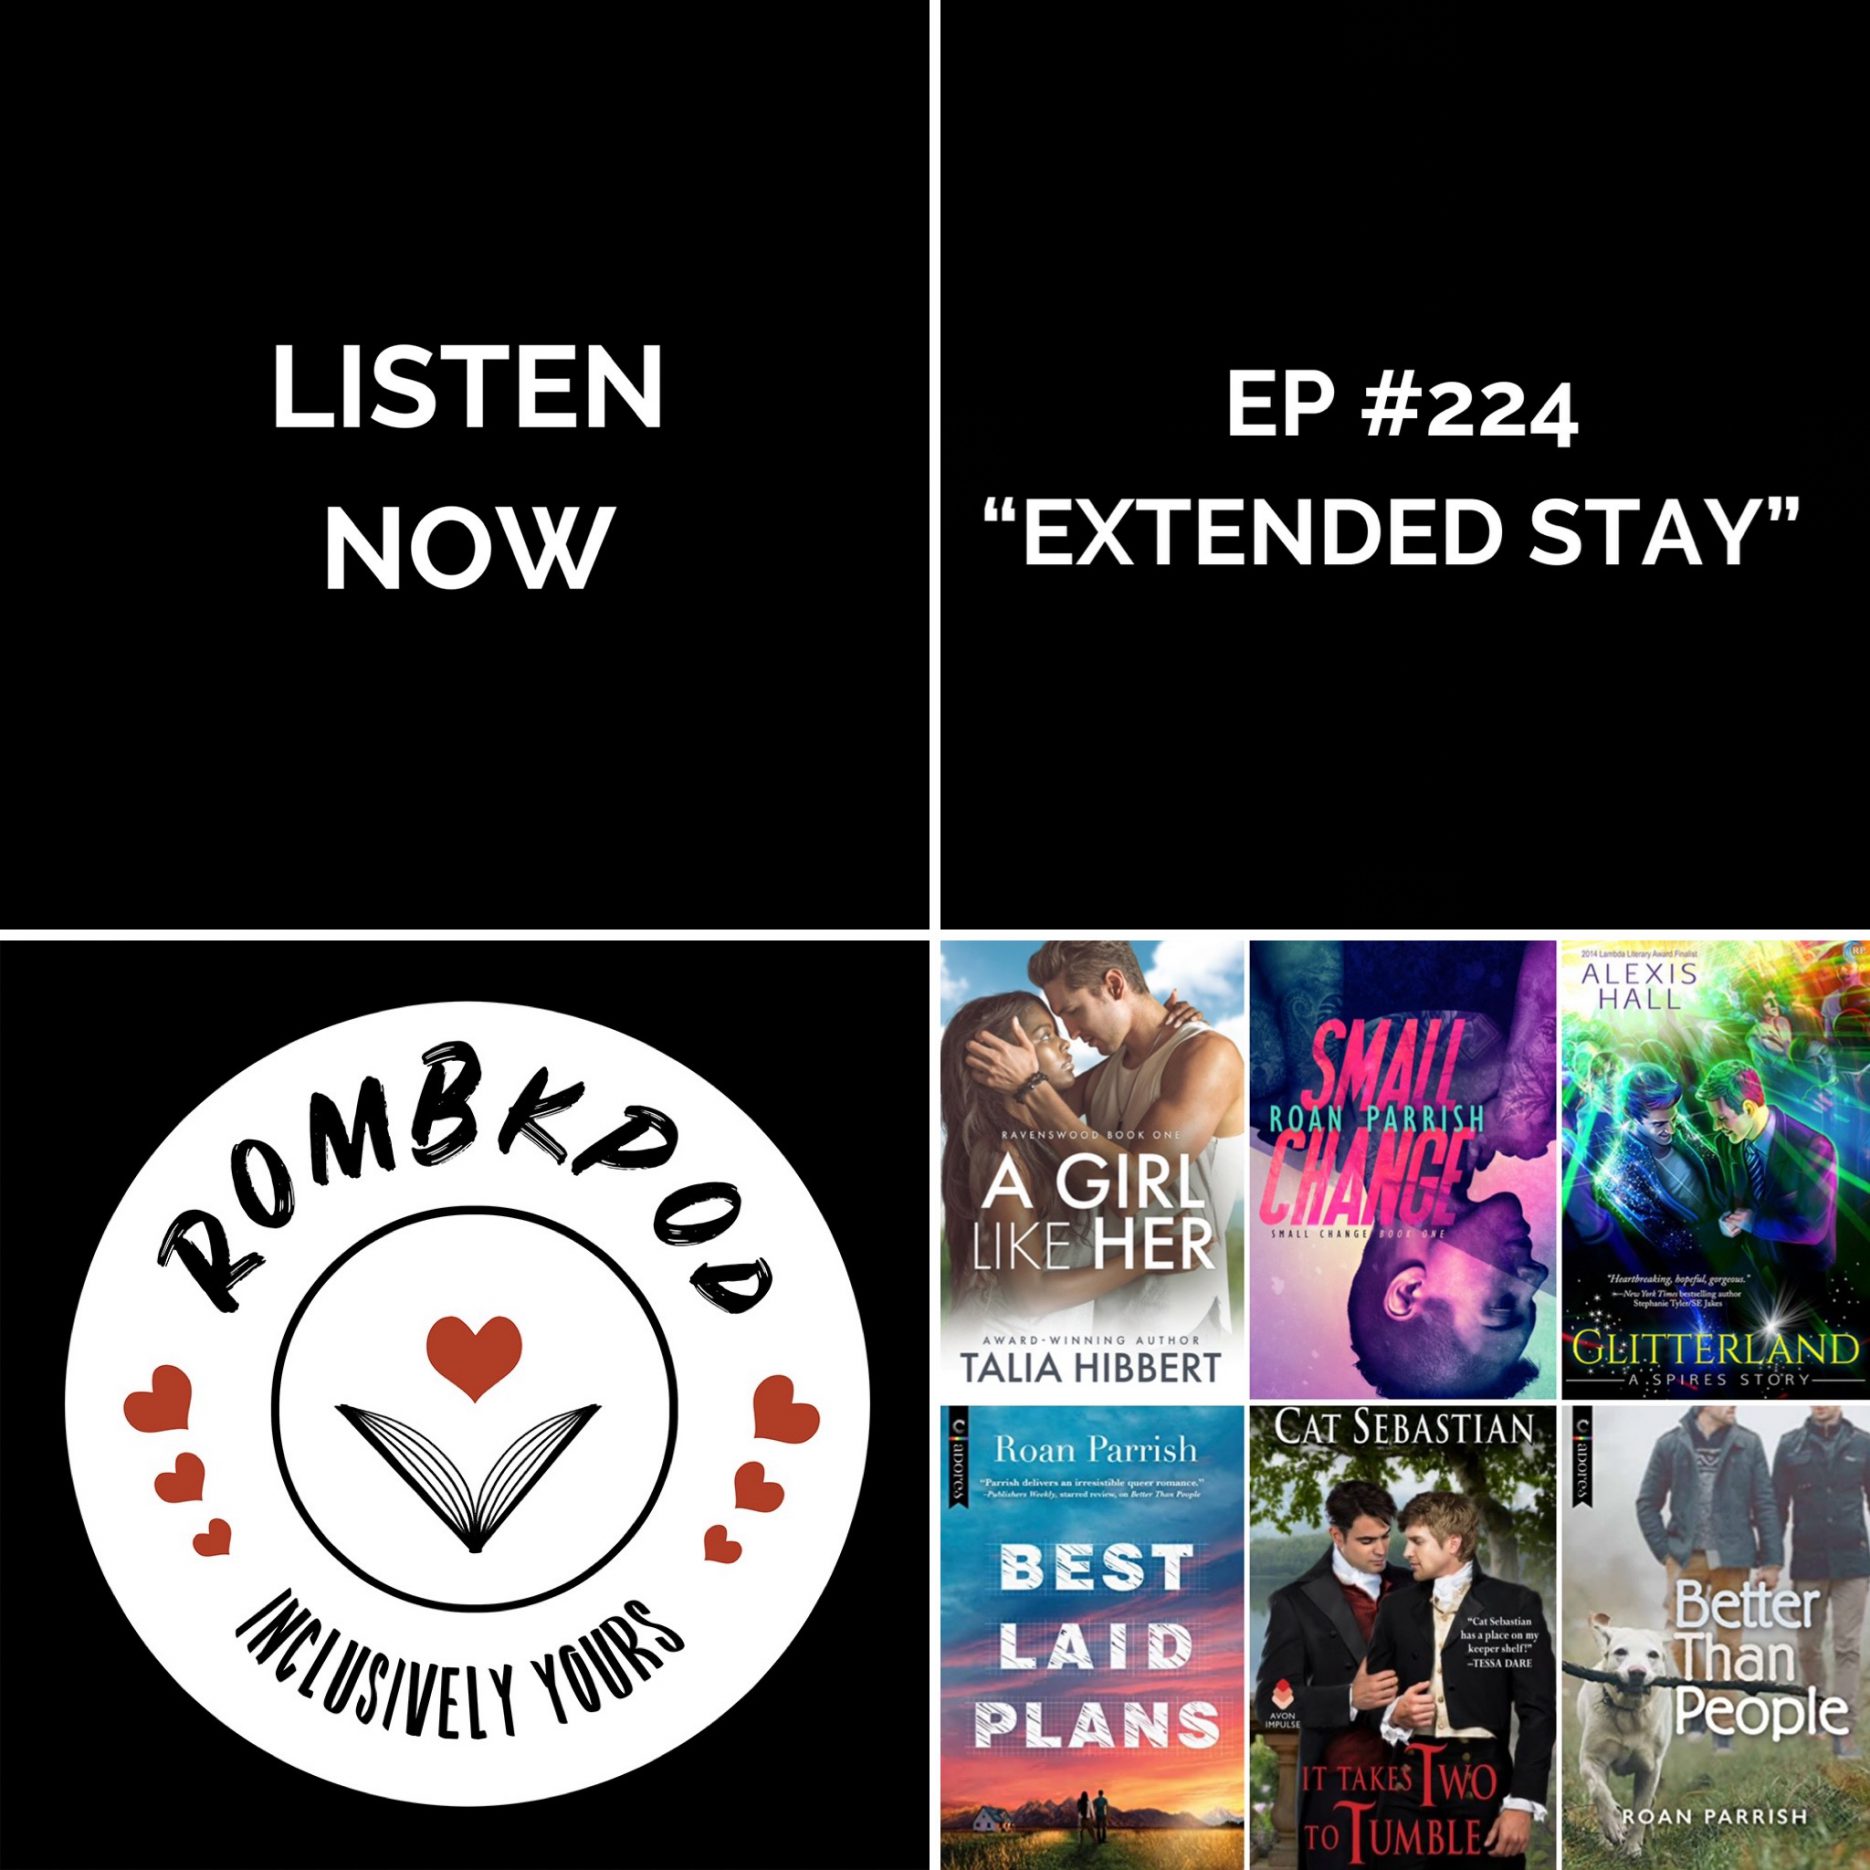 IMAGE: lower left corner, RomBkPod heart logo; lower right corner, ep #224 book cover collage; IMAGE TEXT: Listen Now, ep #224 "Extended Stay"